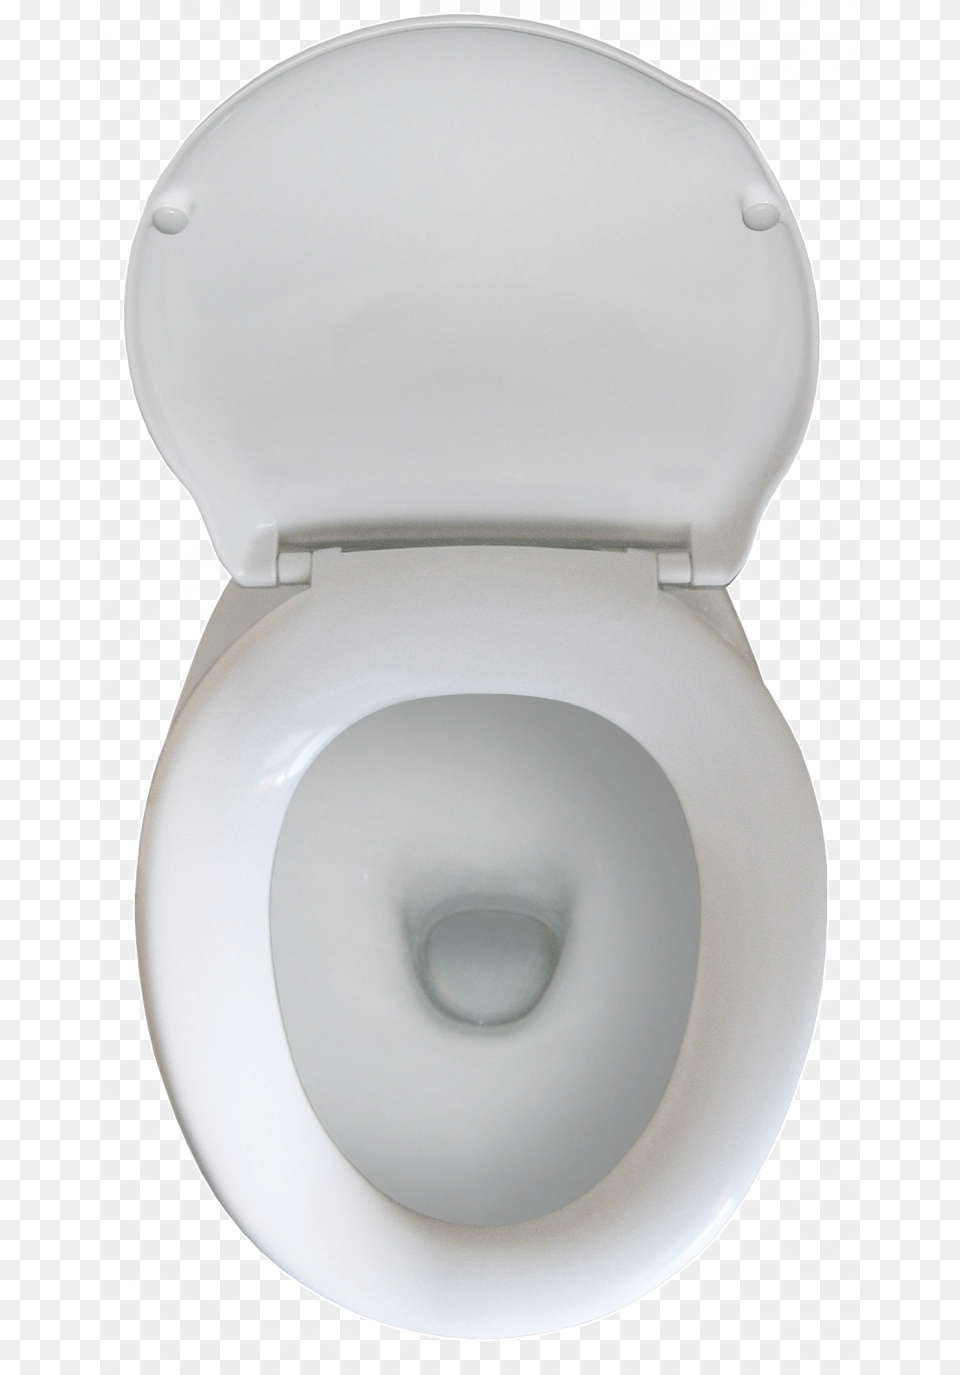 Top View Of Toilet Bowl, Indoors, Bathroom, Room, Potty Png Image